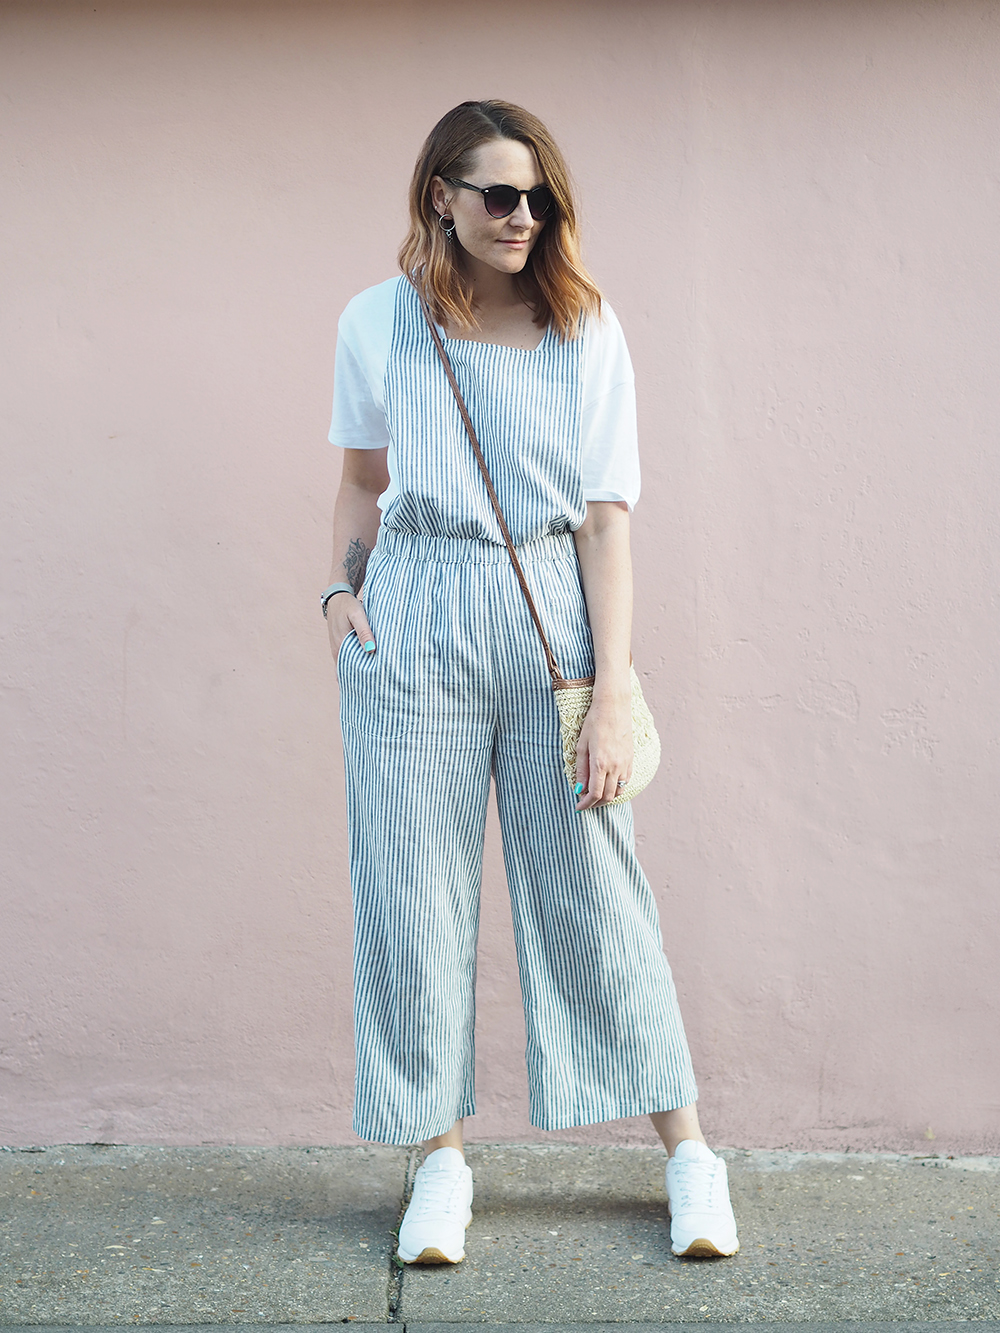 la Redoute striped jumpsuit casual summer outfit with trainers and straw bag